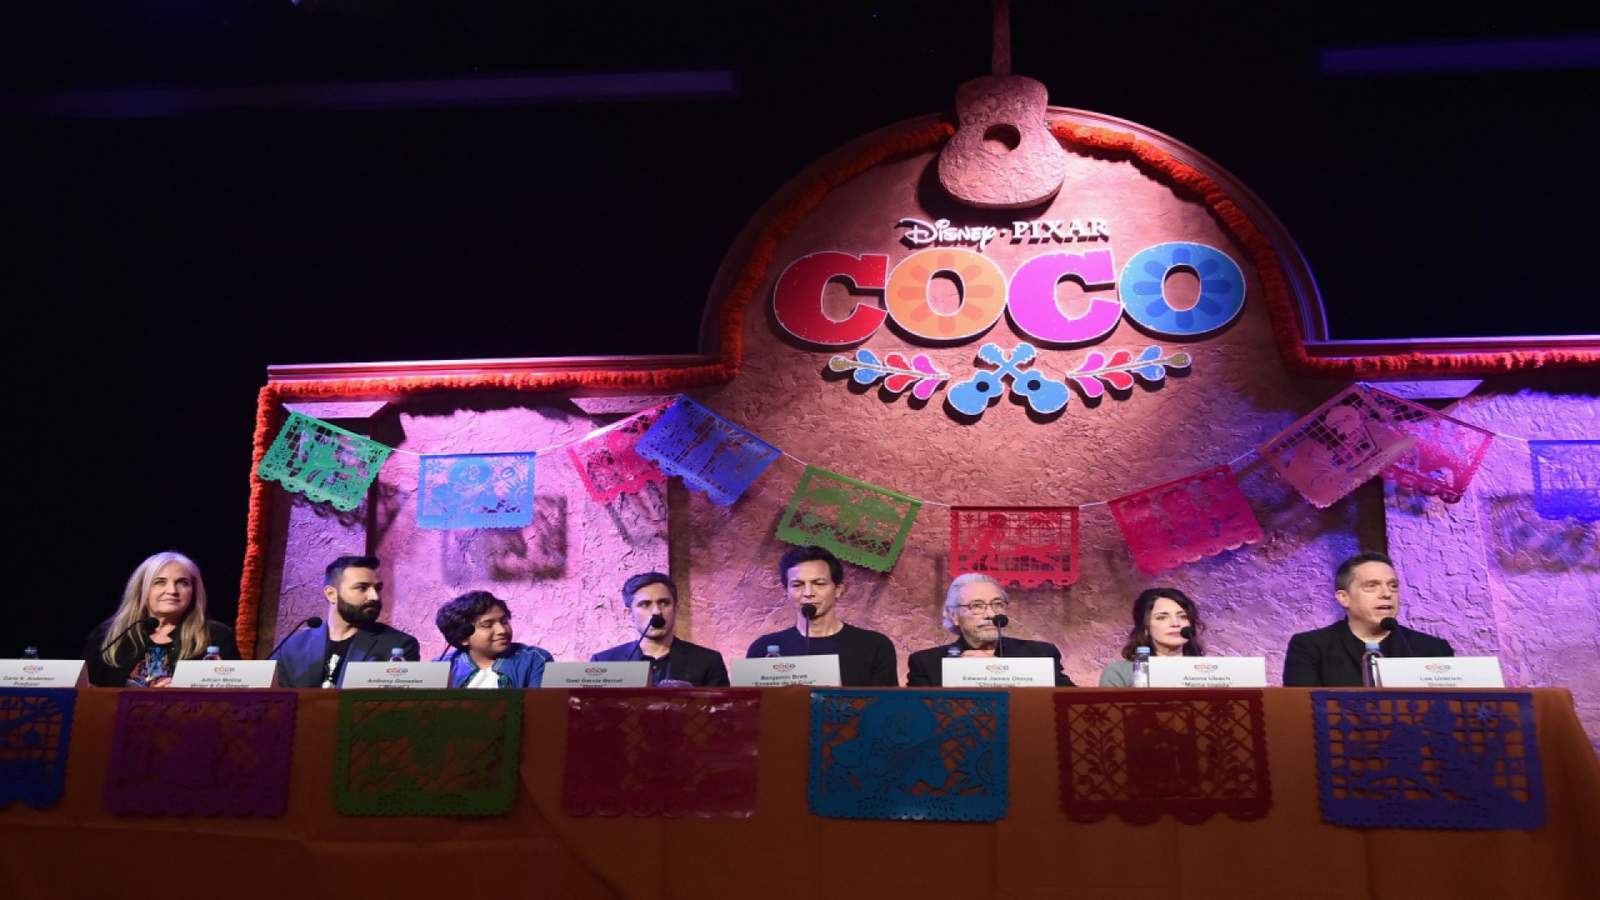 ‘Coco' credited for introducing new generations to Day of the Dead, reawakening meaning of celebration